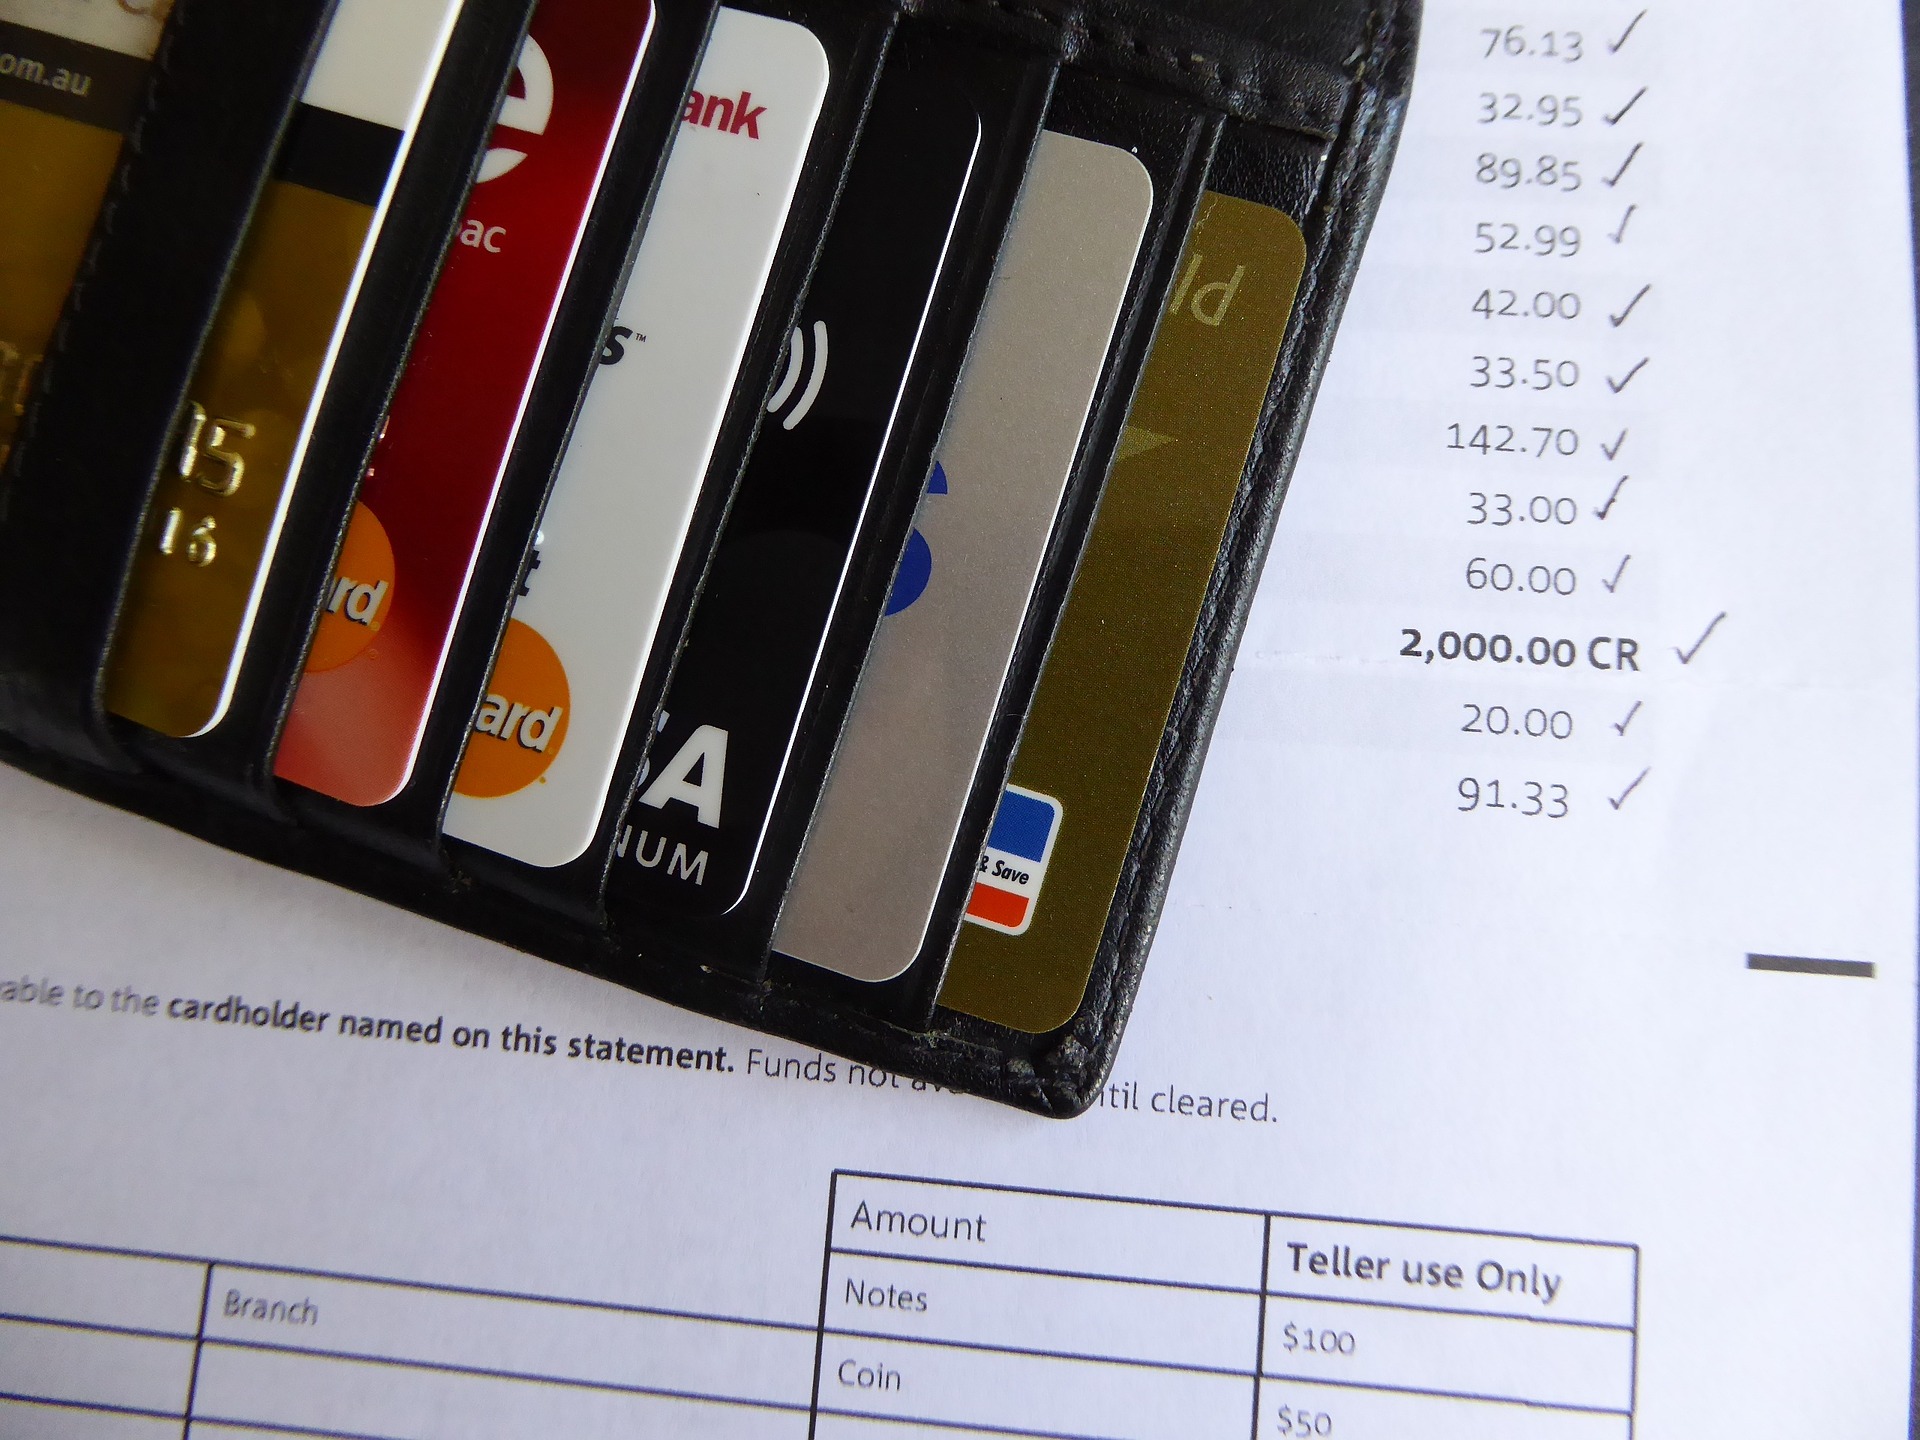 10 Things to Look at on your Credit Card Statement